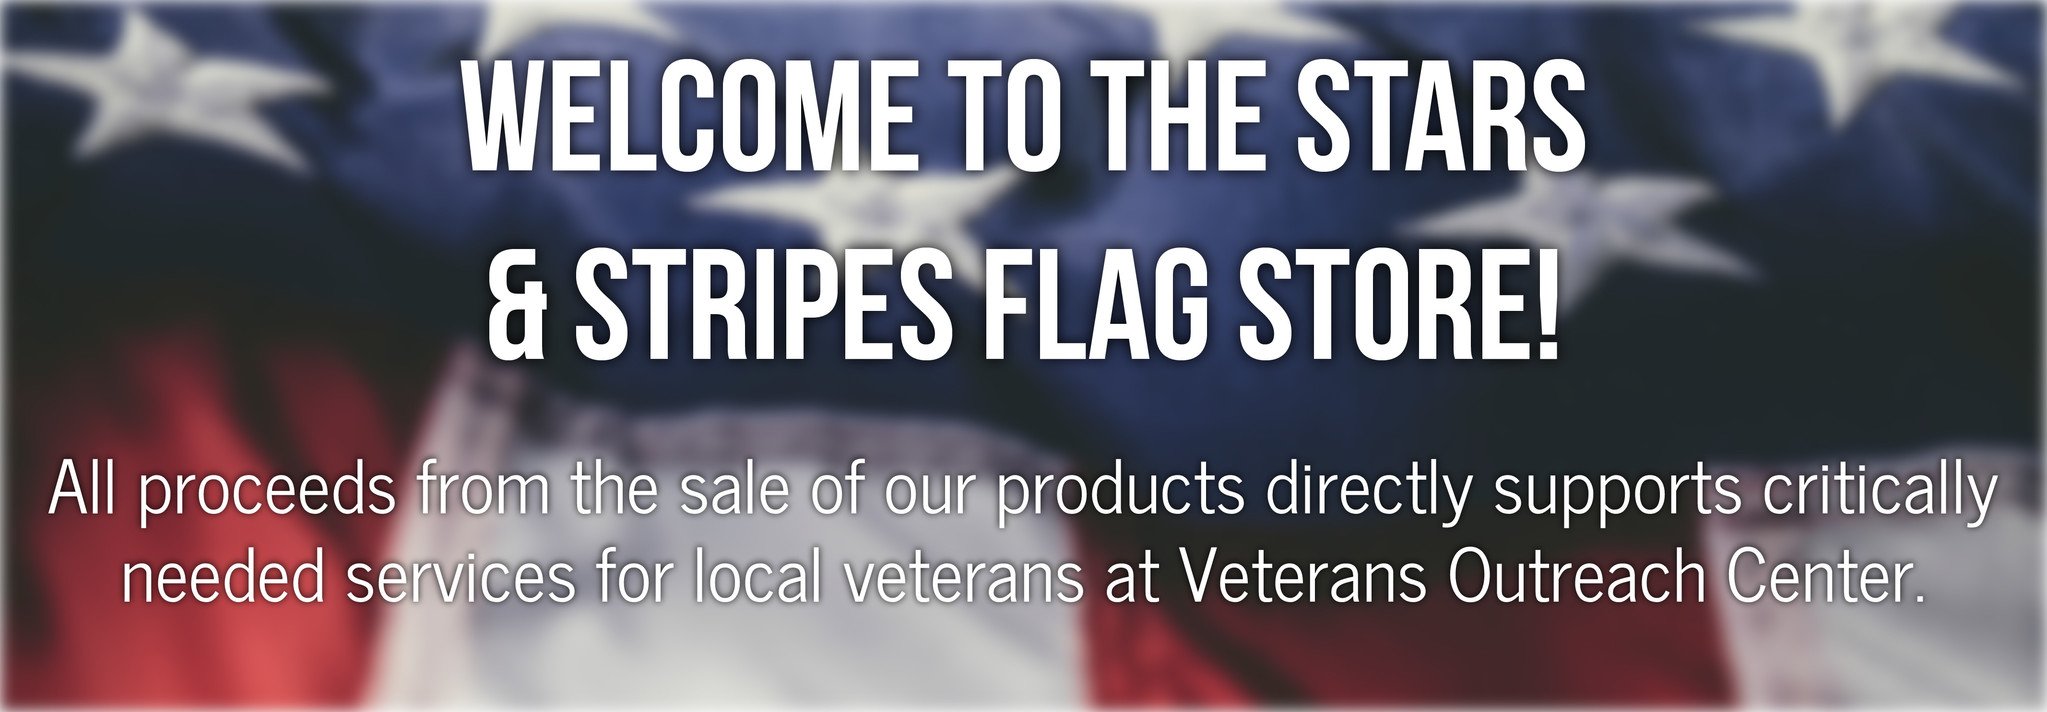 Flag Store Welcome